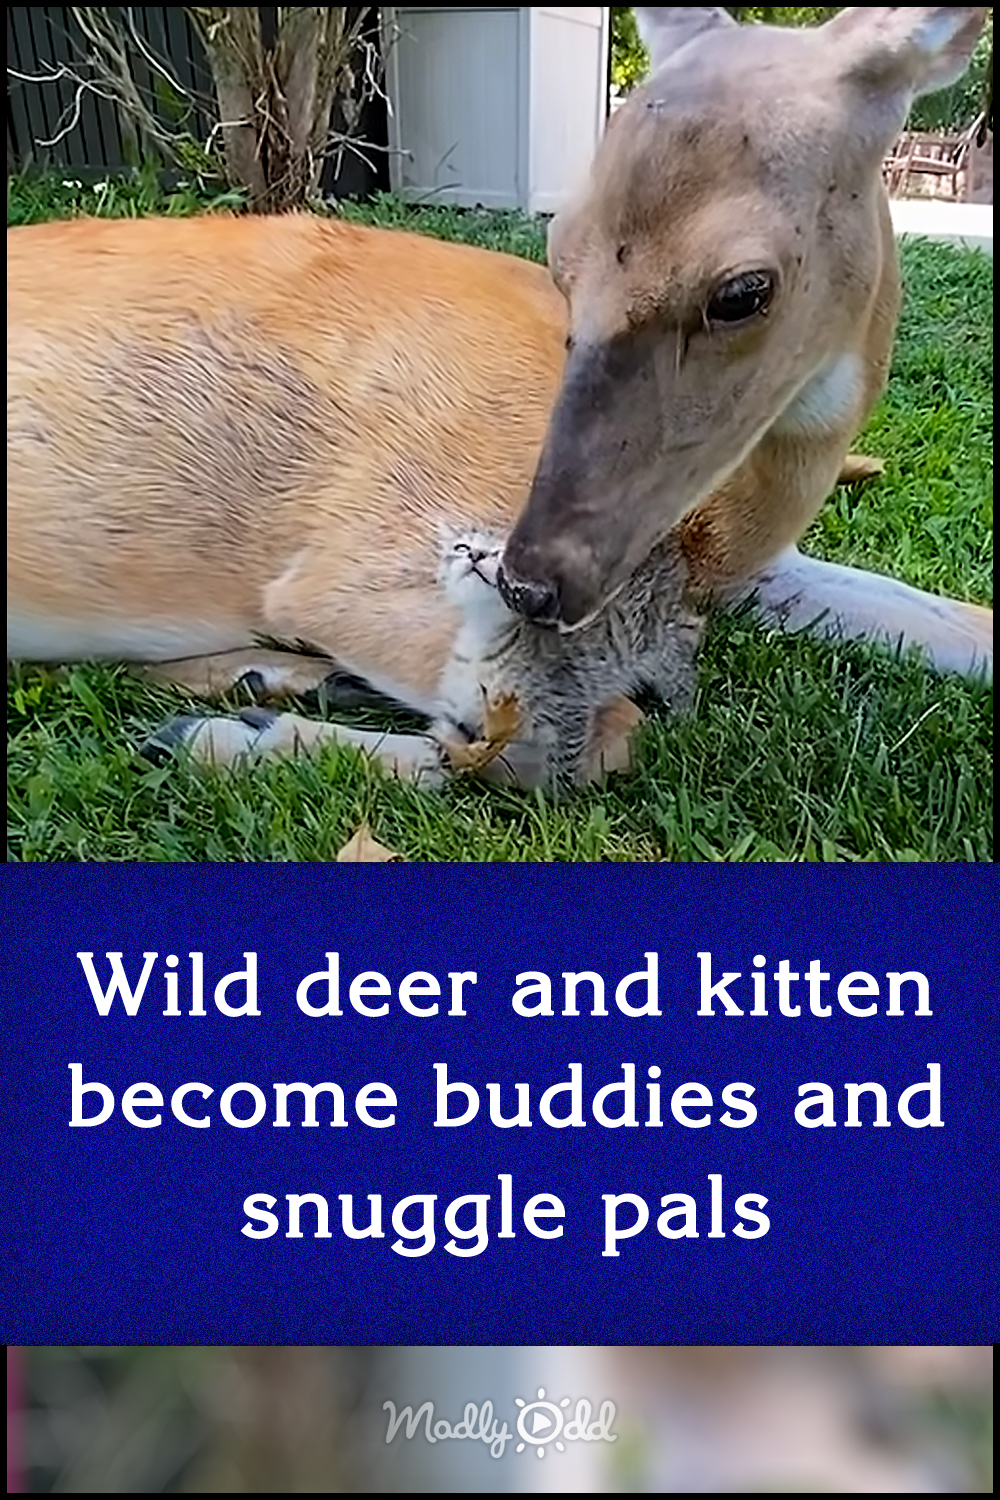 Wild deer and kitten become buddies and snuggle pals